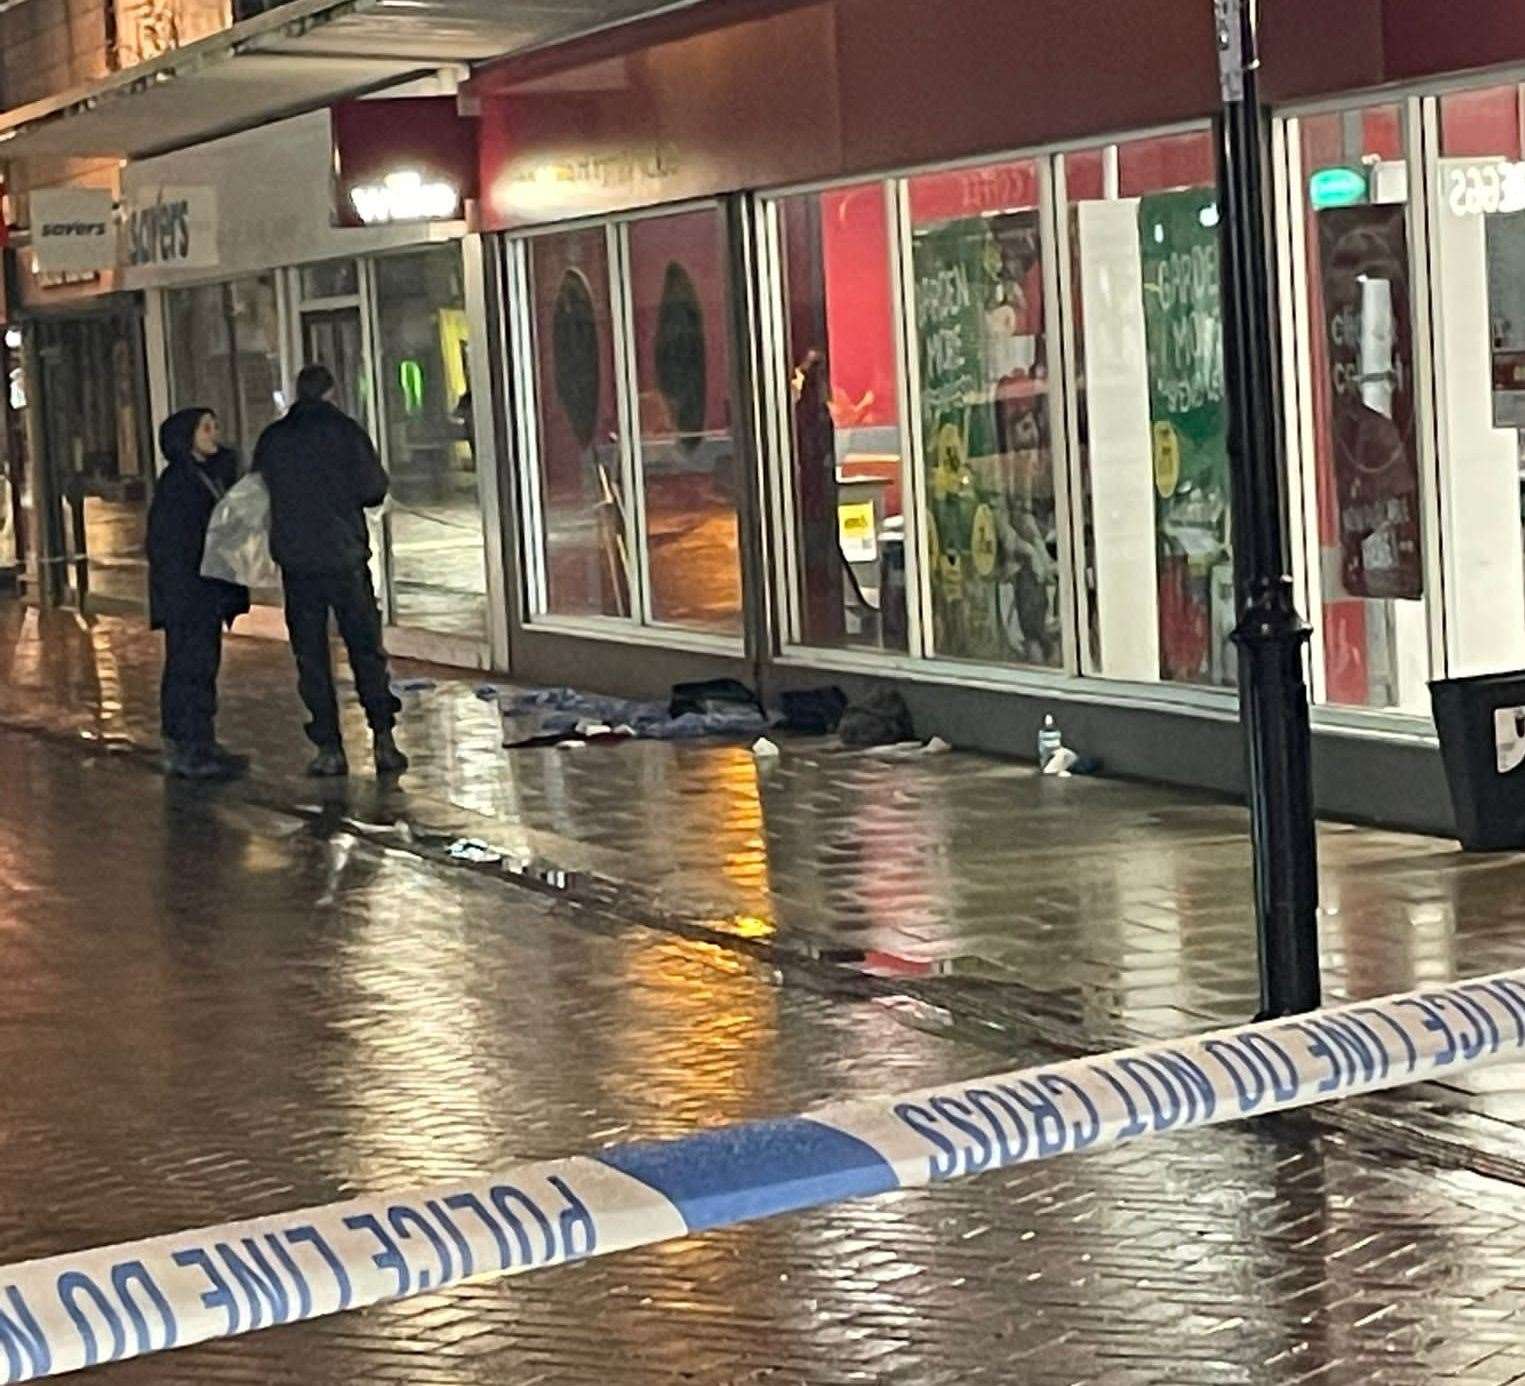 Police cordoned off part of Gillingham High Street after the stabbing